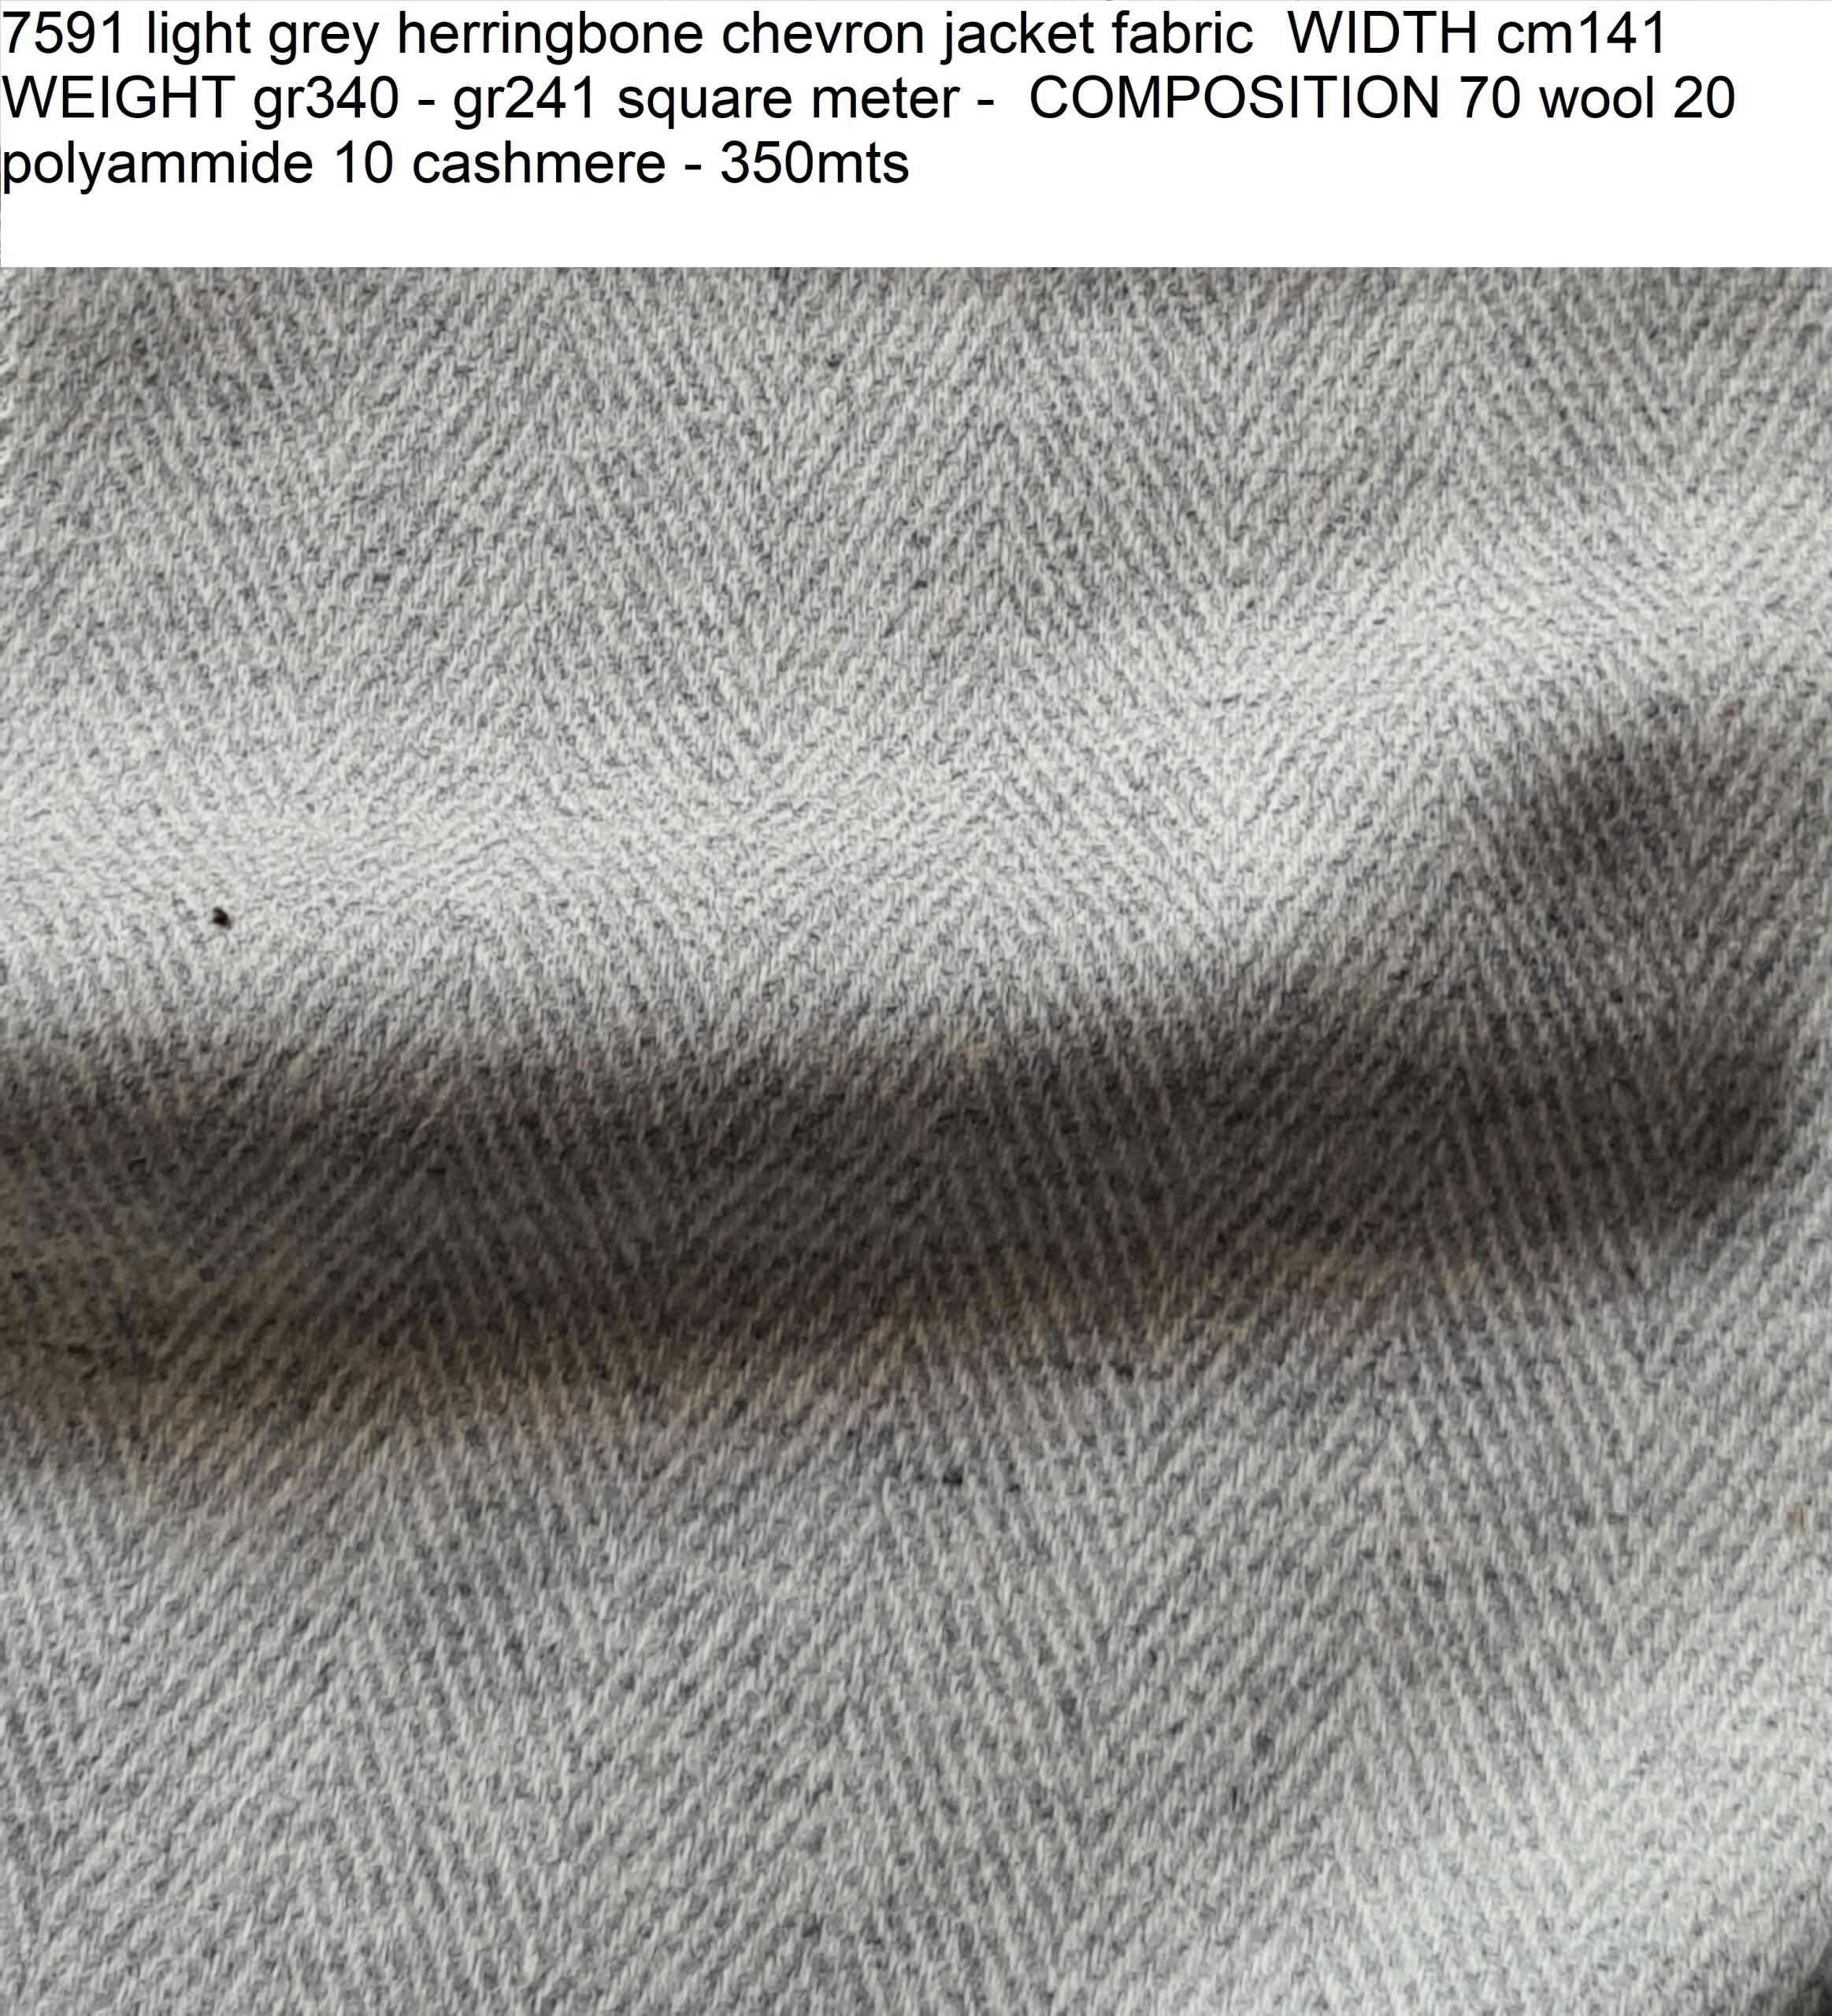 7591 light grey herringbone chevron jacket fabric WIDTH cm141 WEIGHT gr340 - gr241 square meter - COMPOSITION 70 wool 20 polyammide 10 cashmere - 350mts